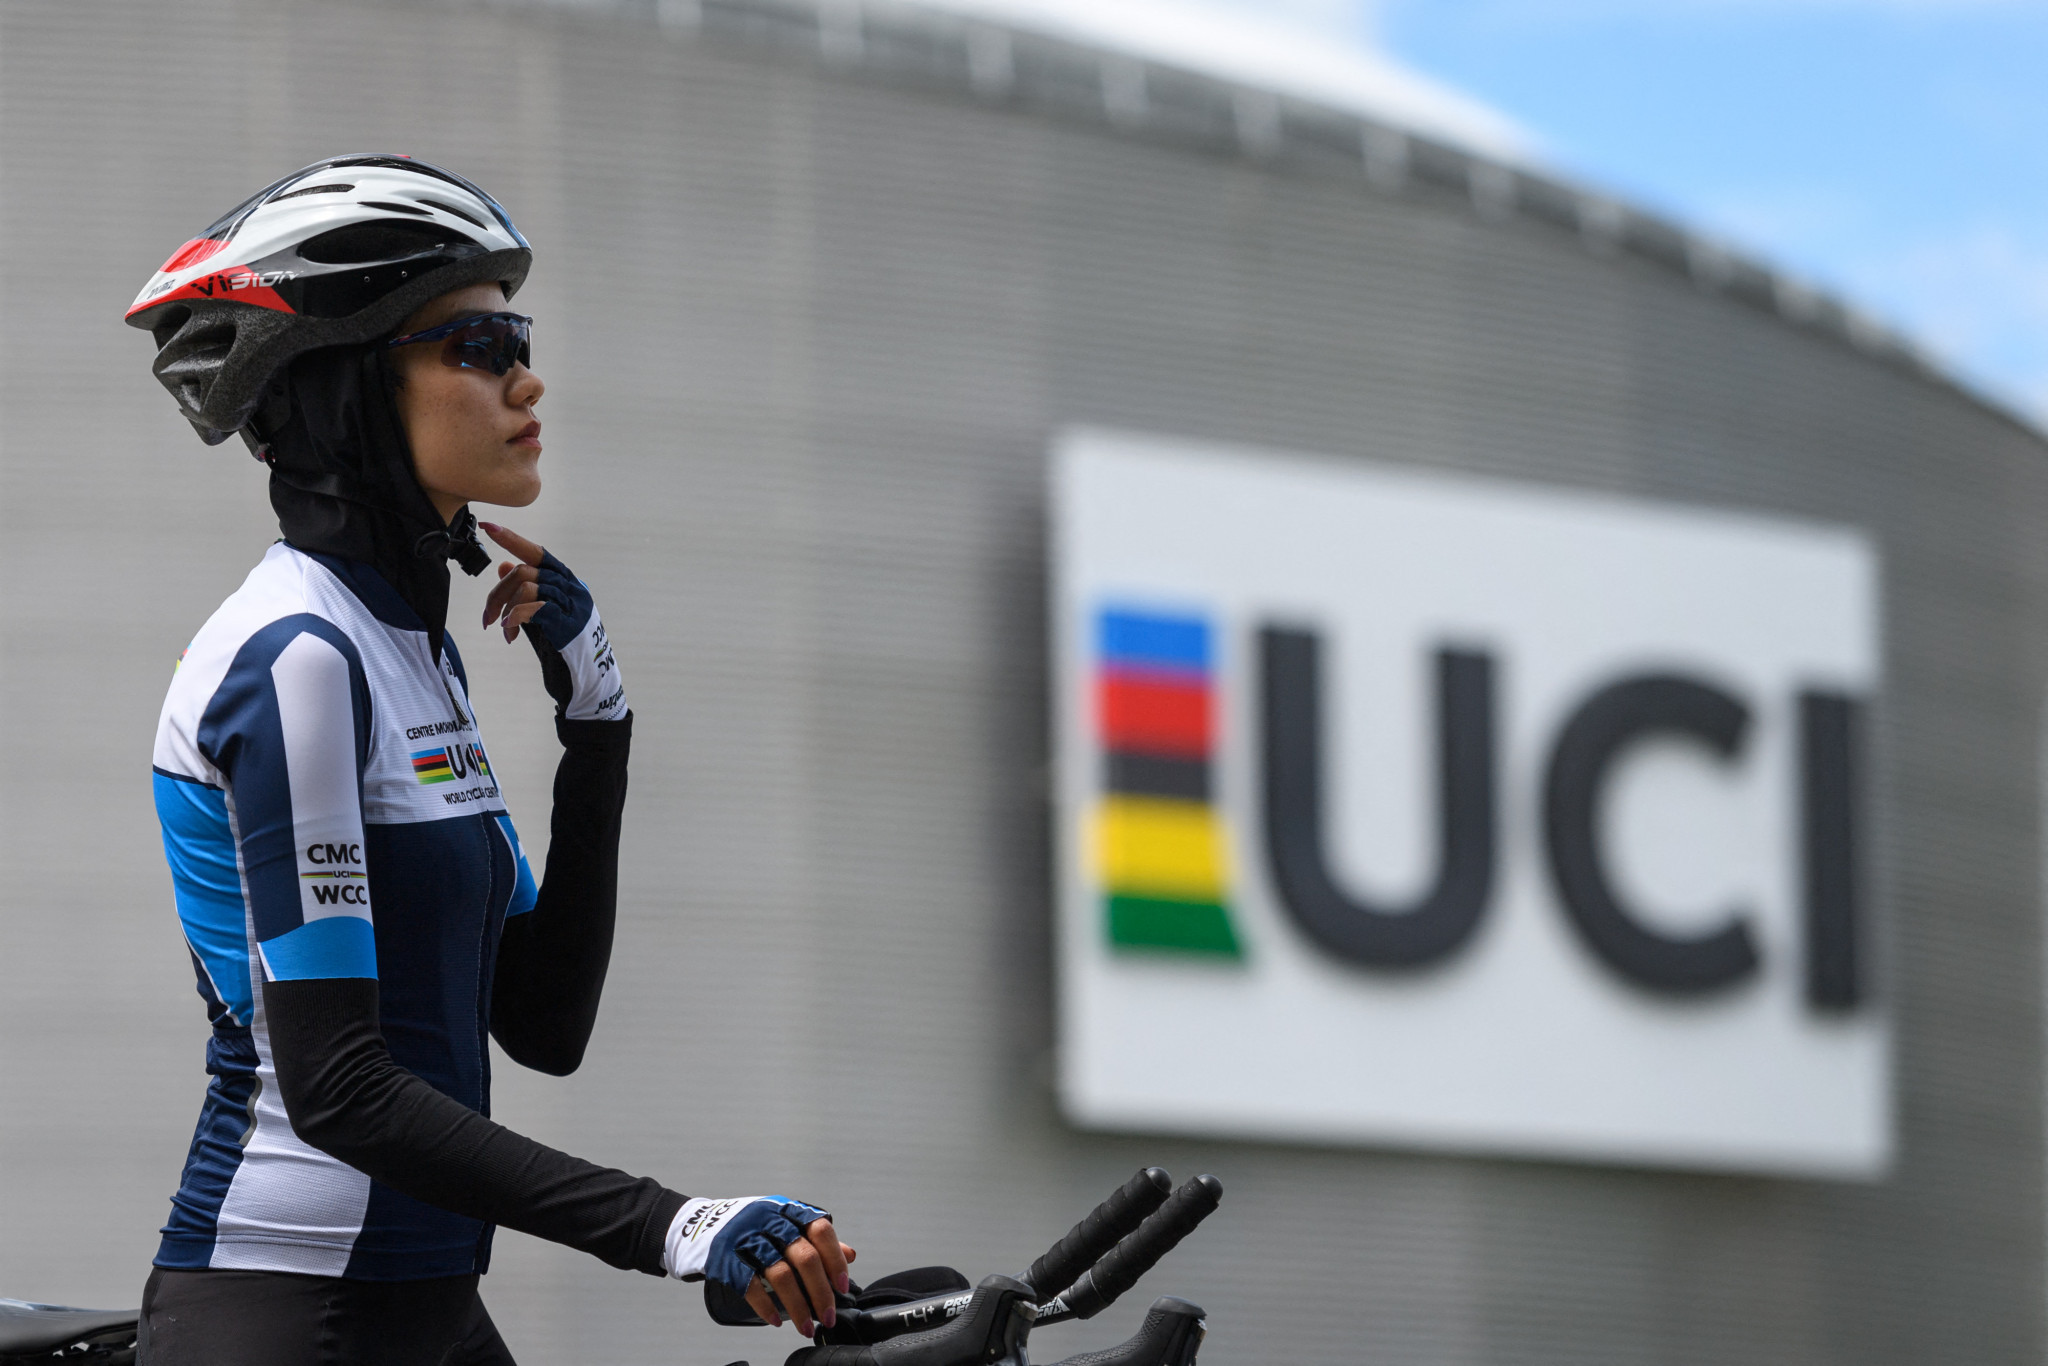 Masomah Ali Zada is set to compete at the Women's Road Cycling Championships of Afghanistan which has been moved to Aigle in Switzerland ©Getty Images